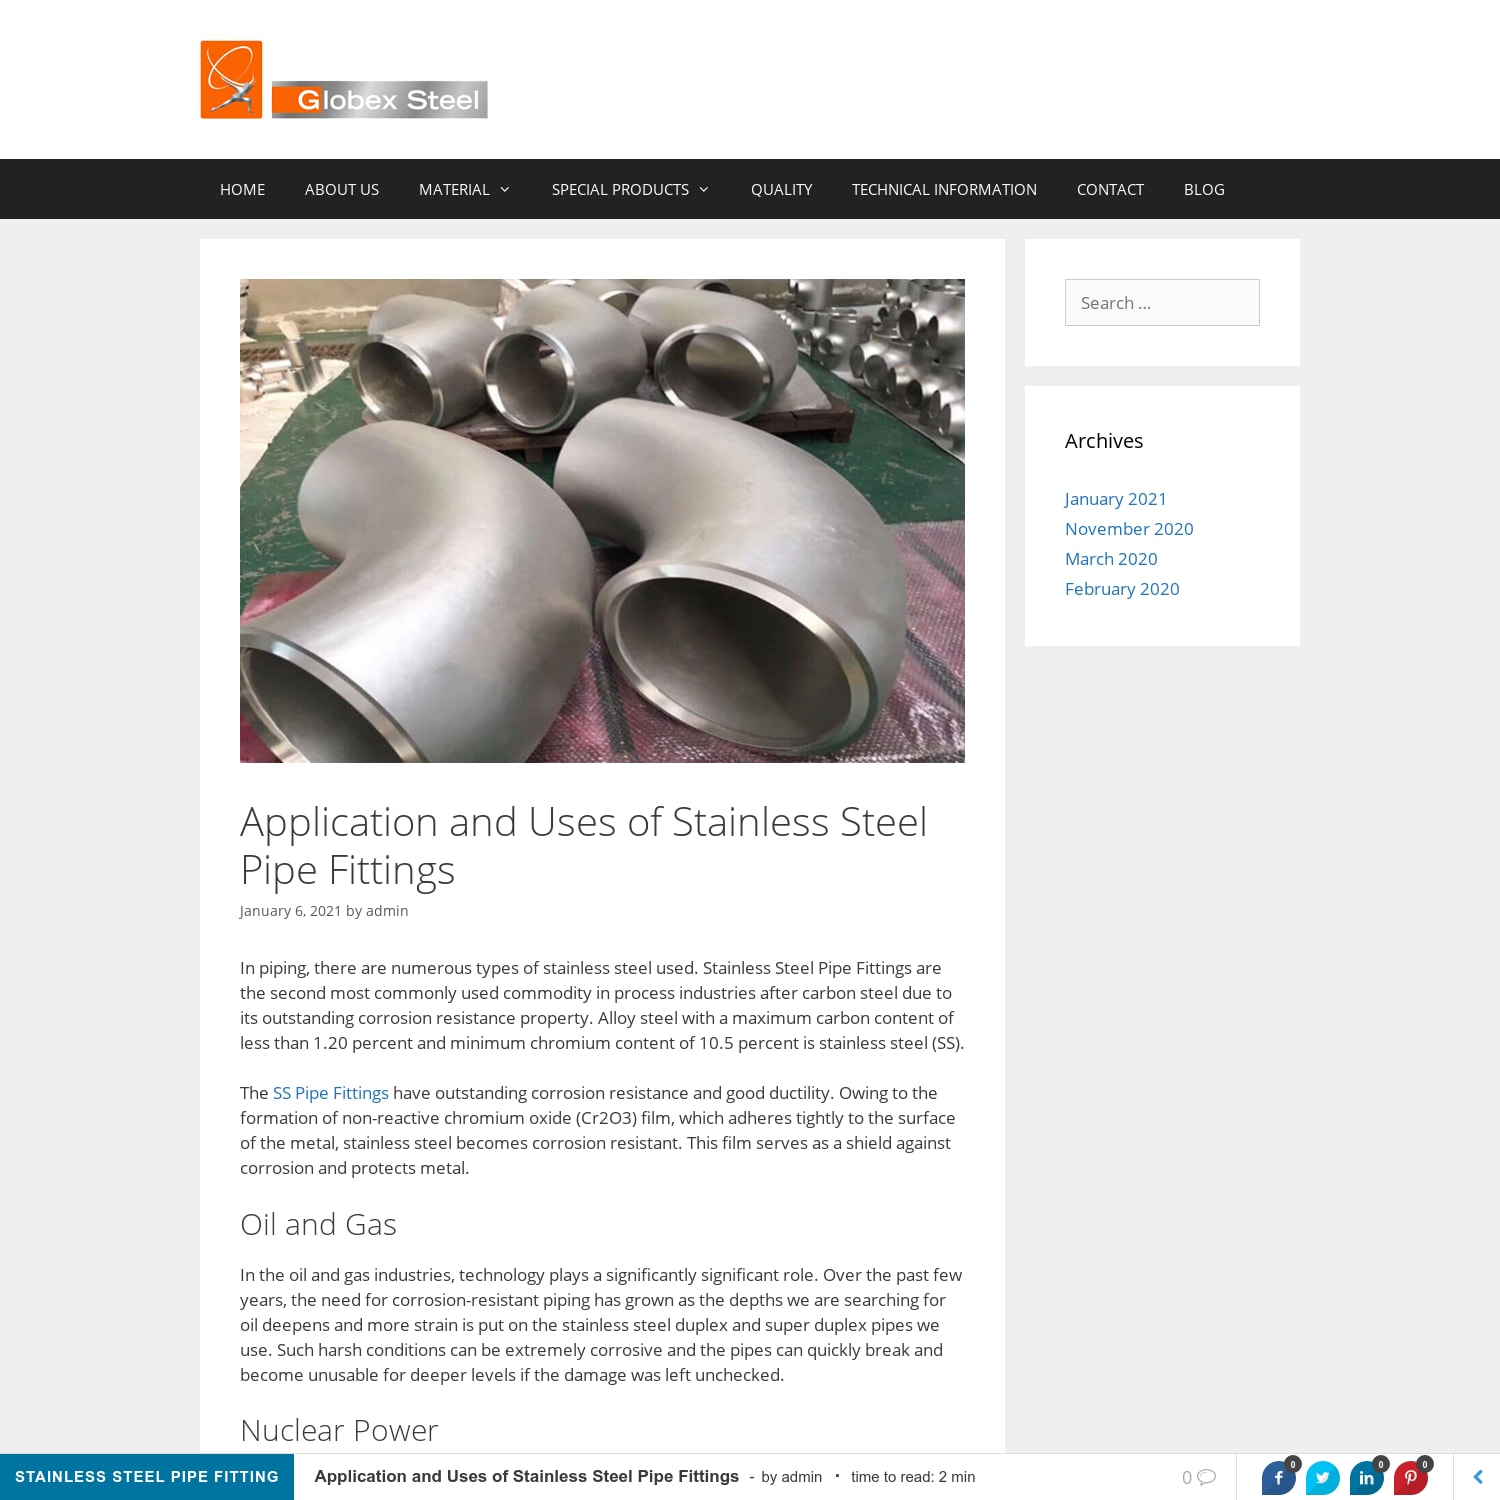 Application and Uses of Stainless Steel Pipe Fittings